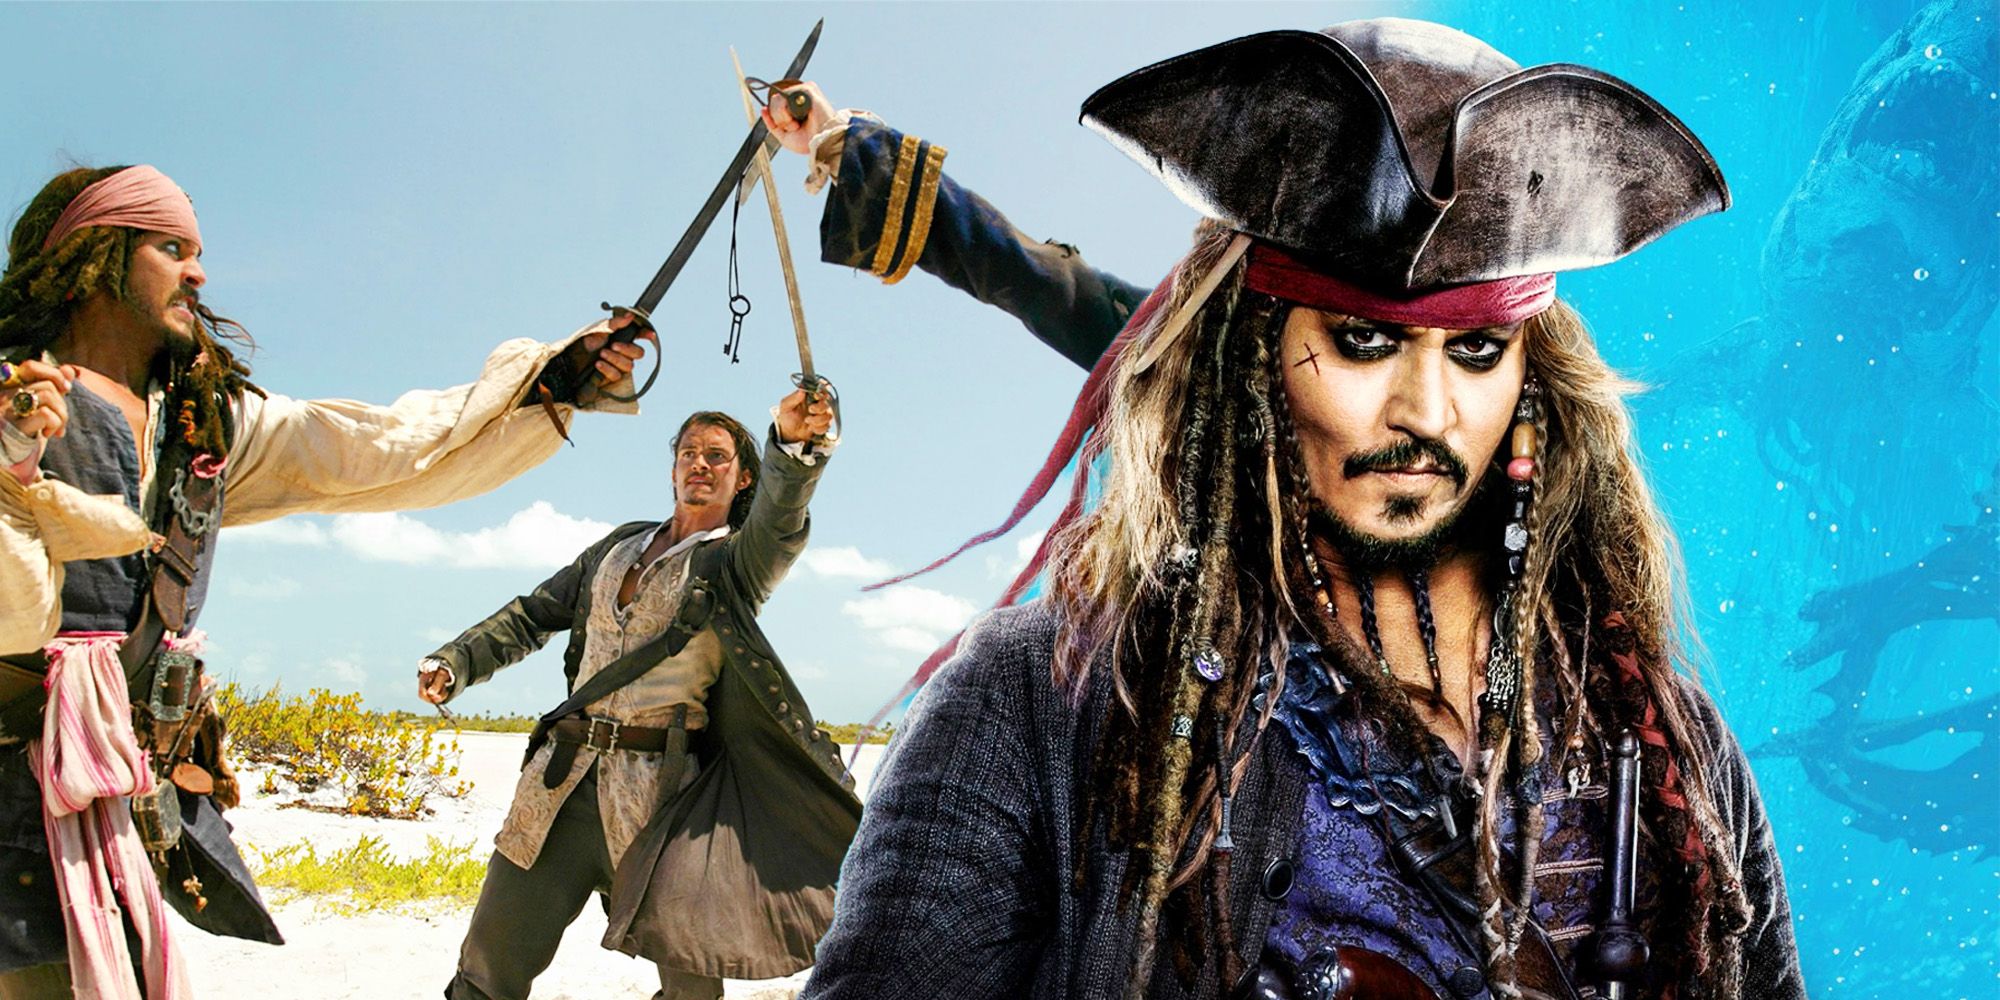 “Good Example… Very Chaotic Battle Scene”: Pirates Of The Caribbean Piracy Details Impress Historian